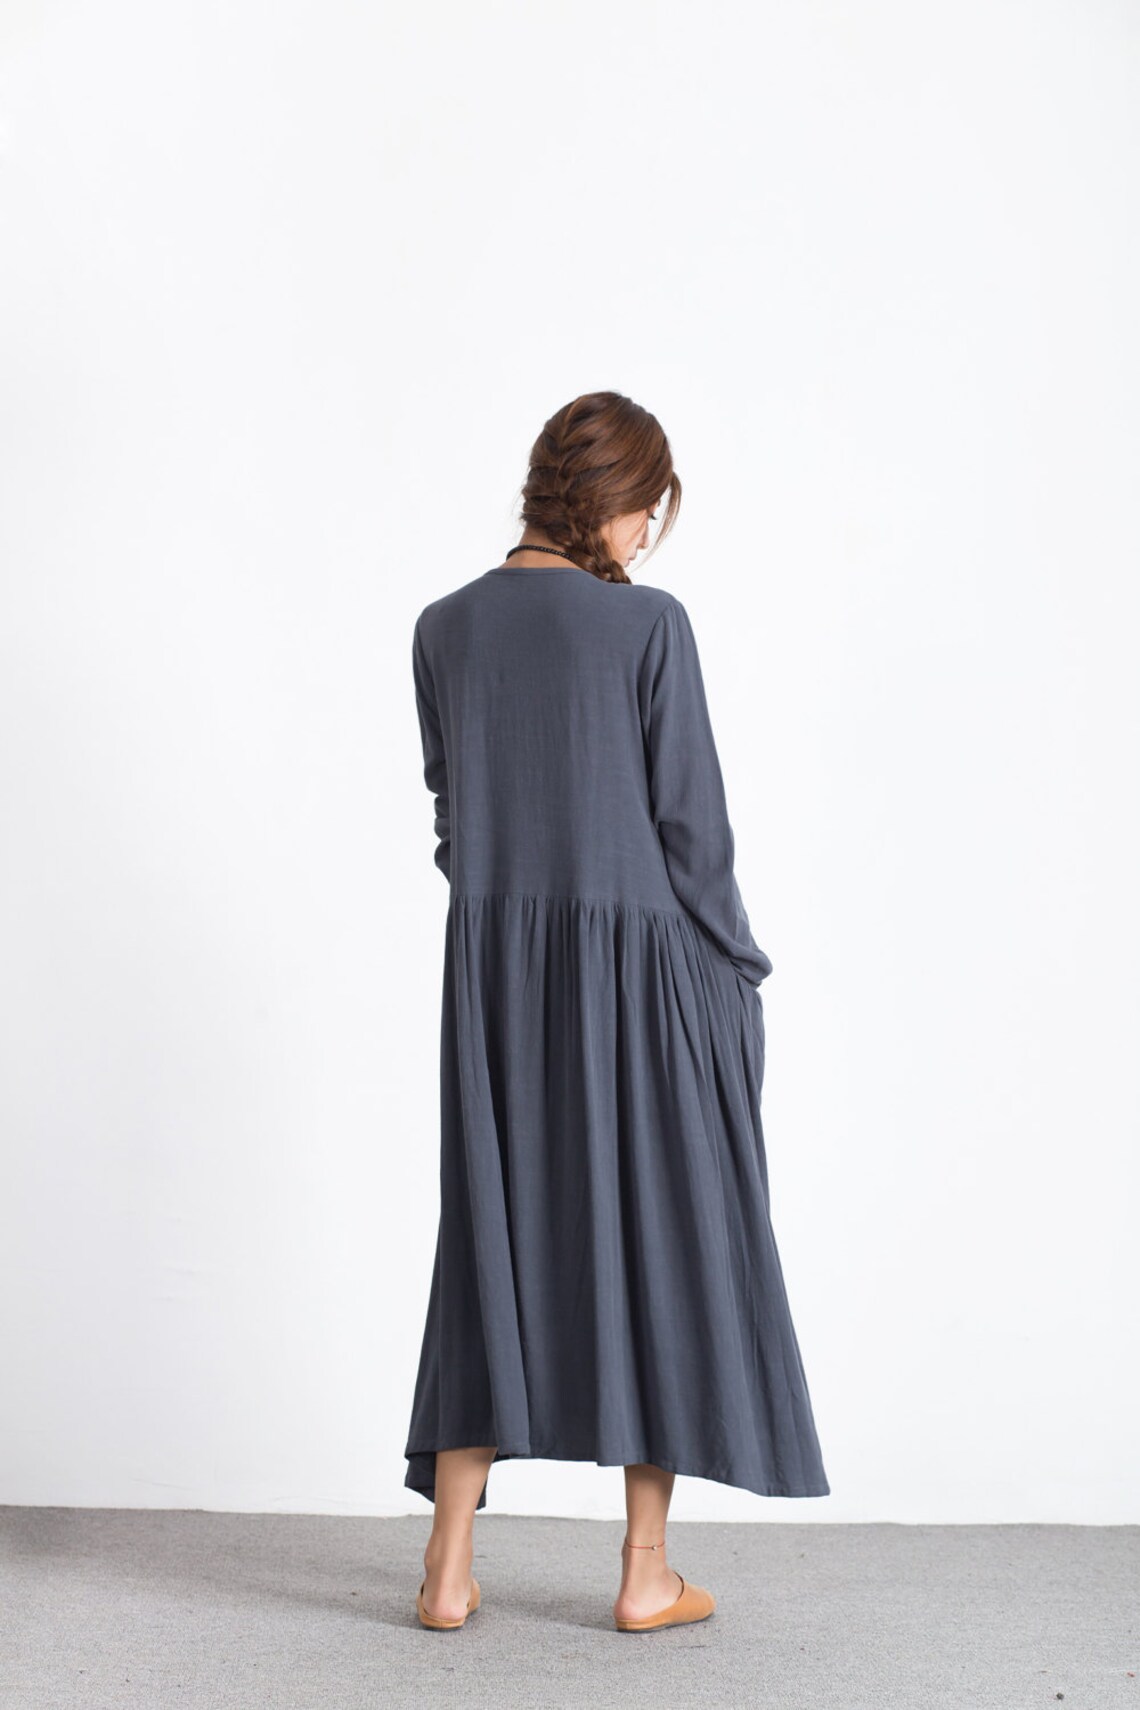 Linen Dresses With Pockets Women Cotton Long Sleeve Maxi - Etsy